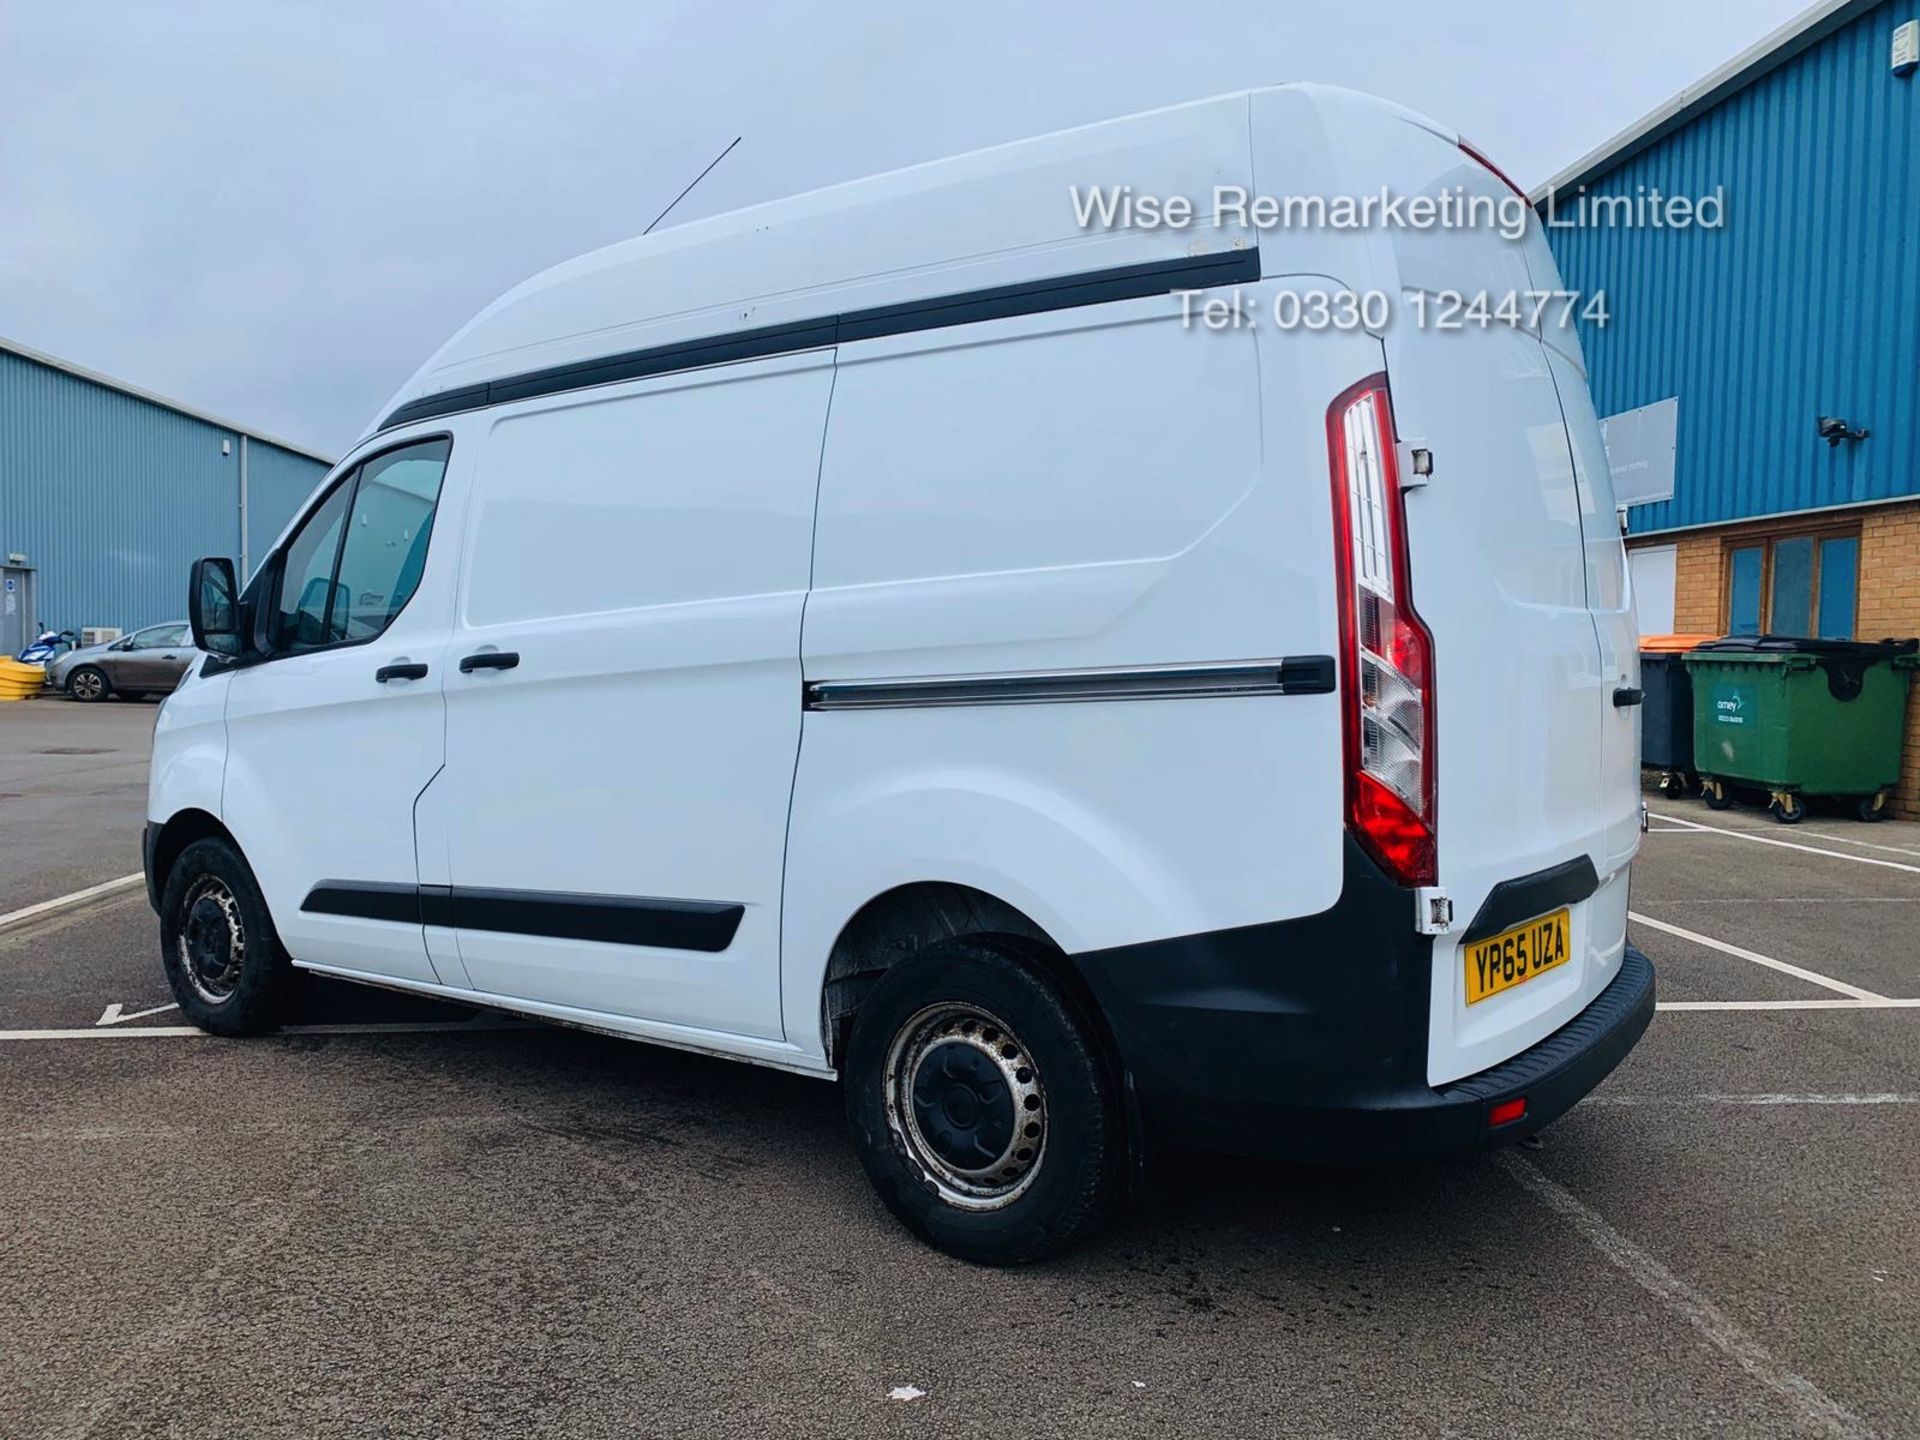 (RESERVE MET) Ford Transit Custom 2.2 TDCI 290 **HIGH ROOF** - 2016 Model - AIR CON- 1 OWNER- FSH- - Image 4 of 24